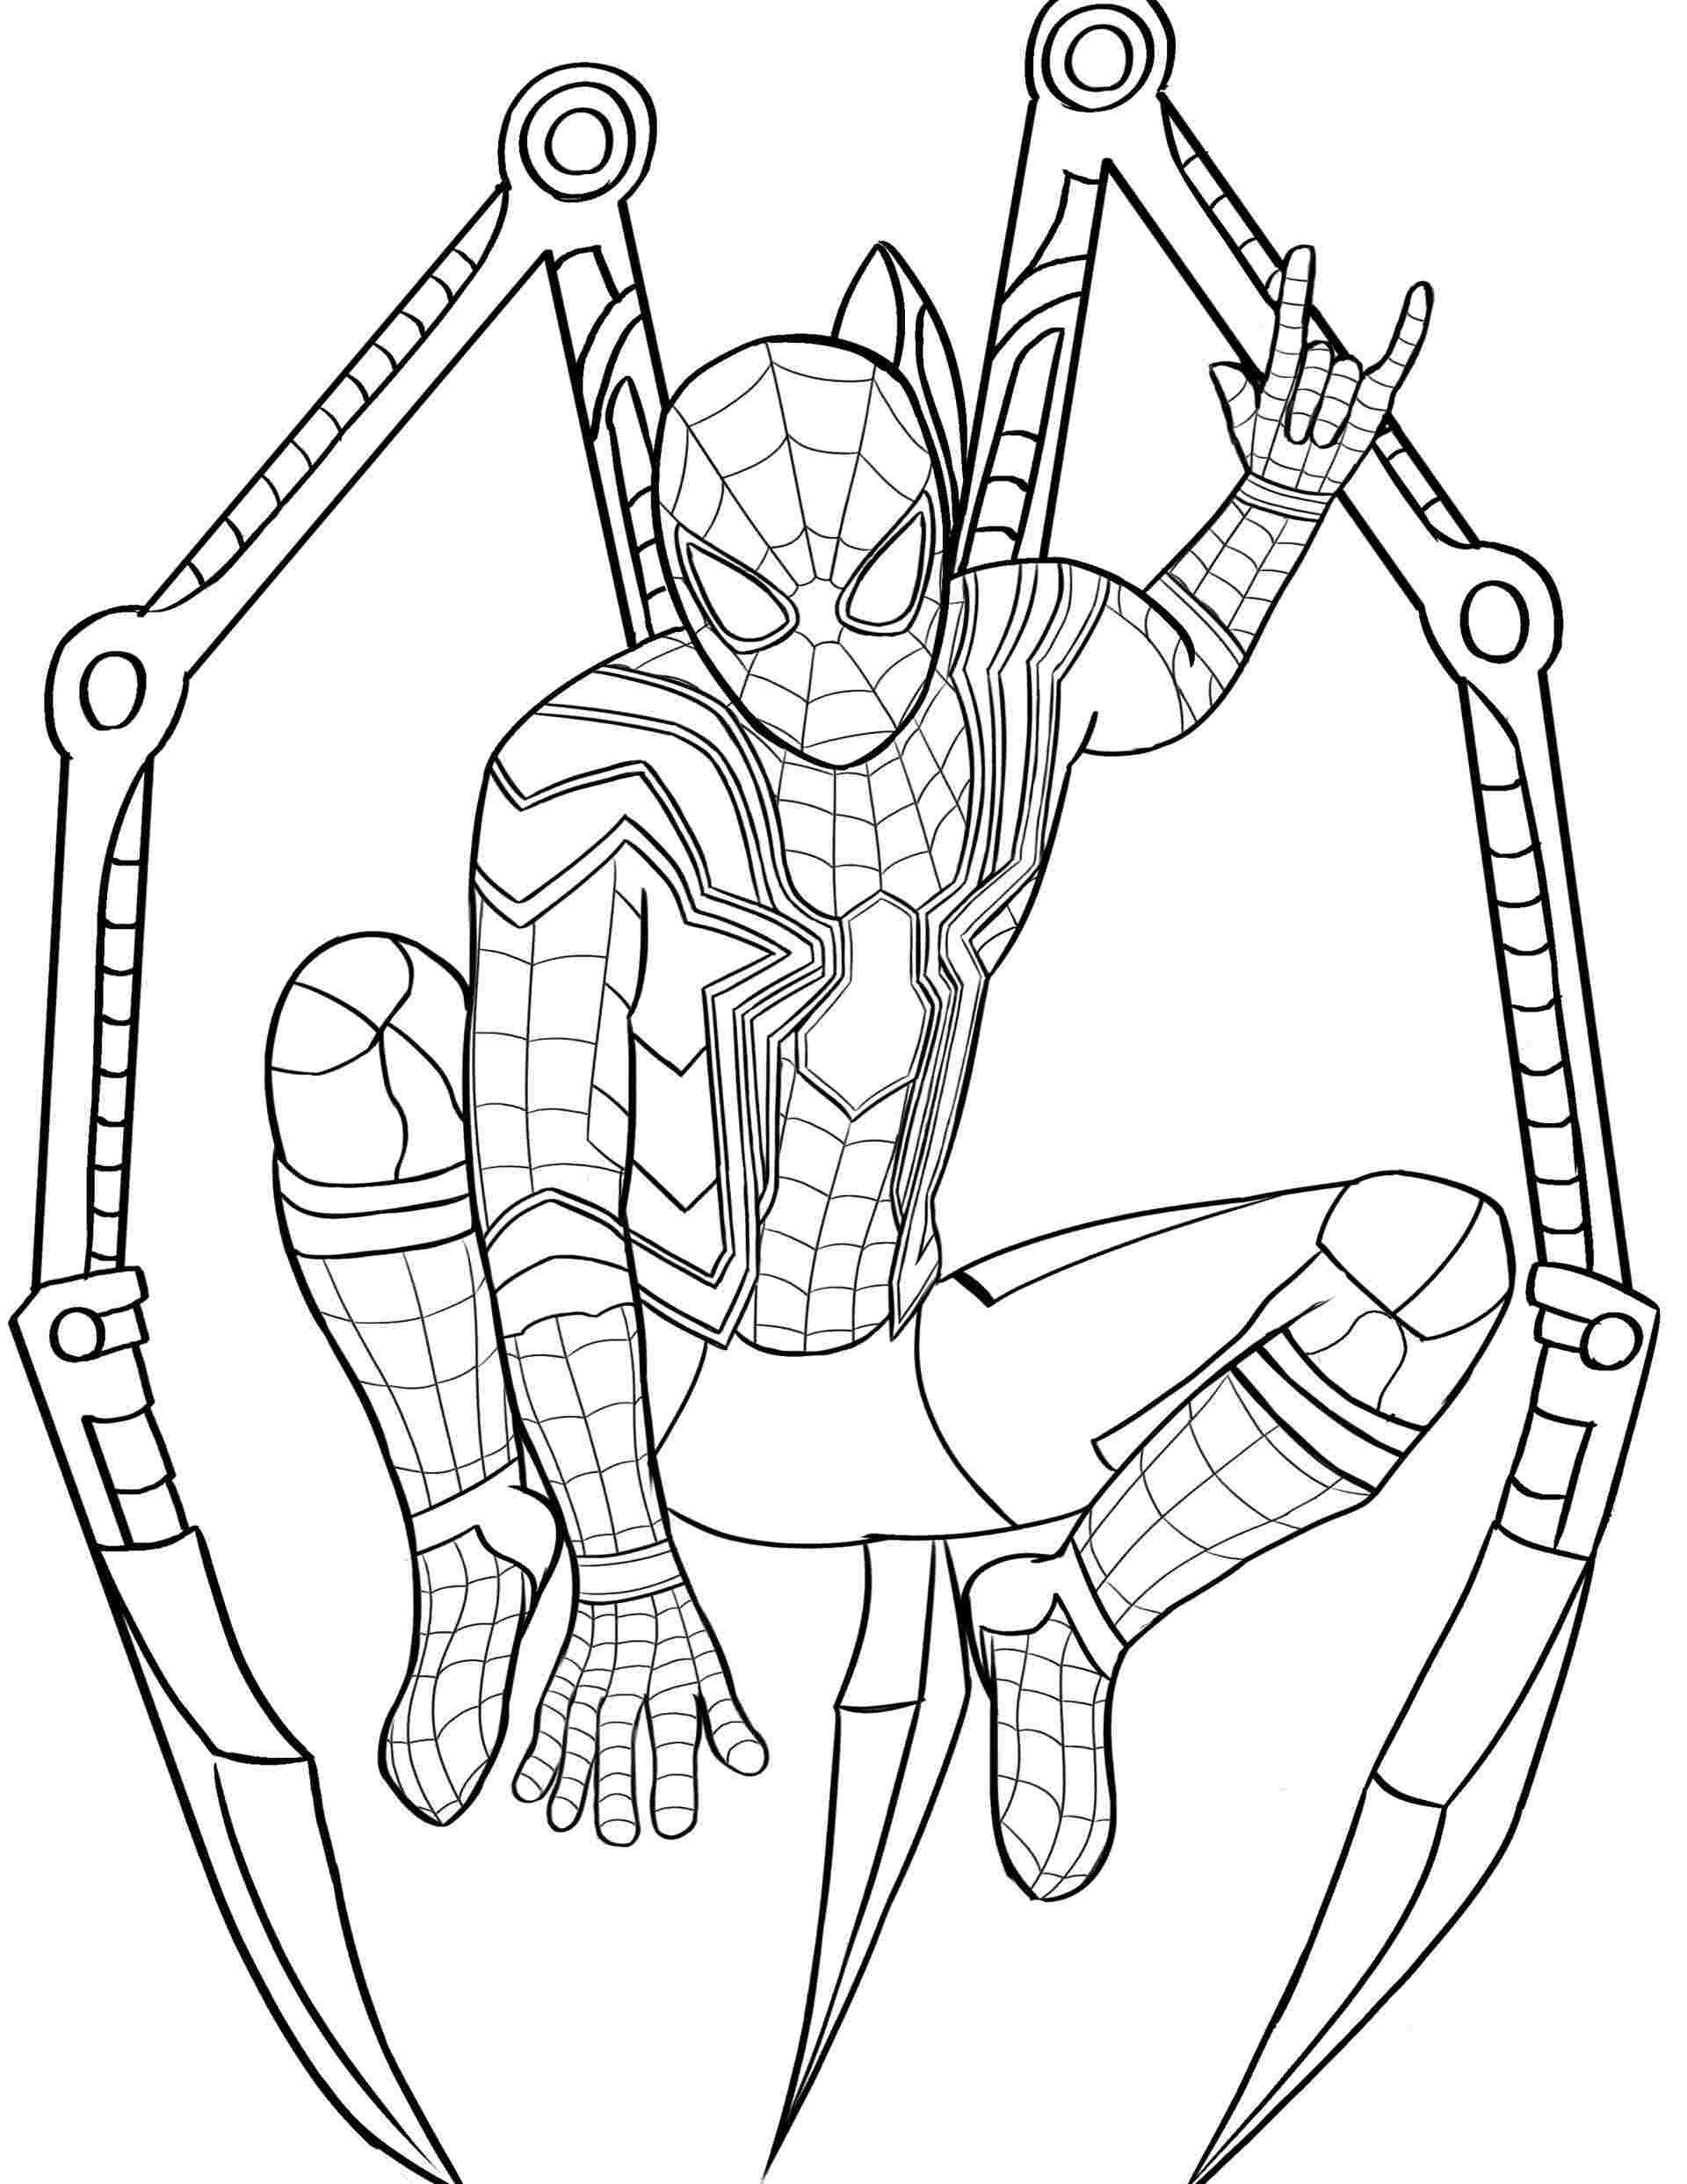 Lego Spiderman Coloring Pages Spider Man Far From Home Printable intérieur Coloriage Lego Spiderman 